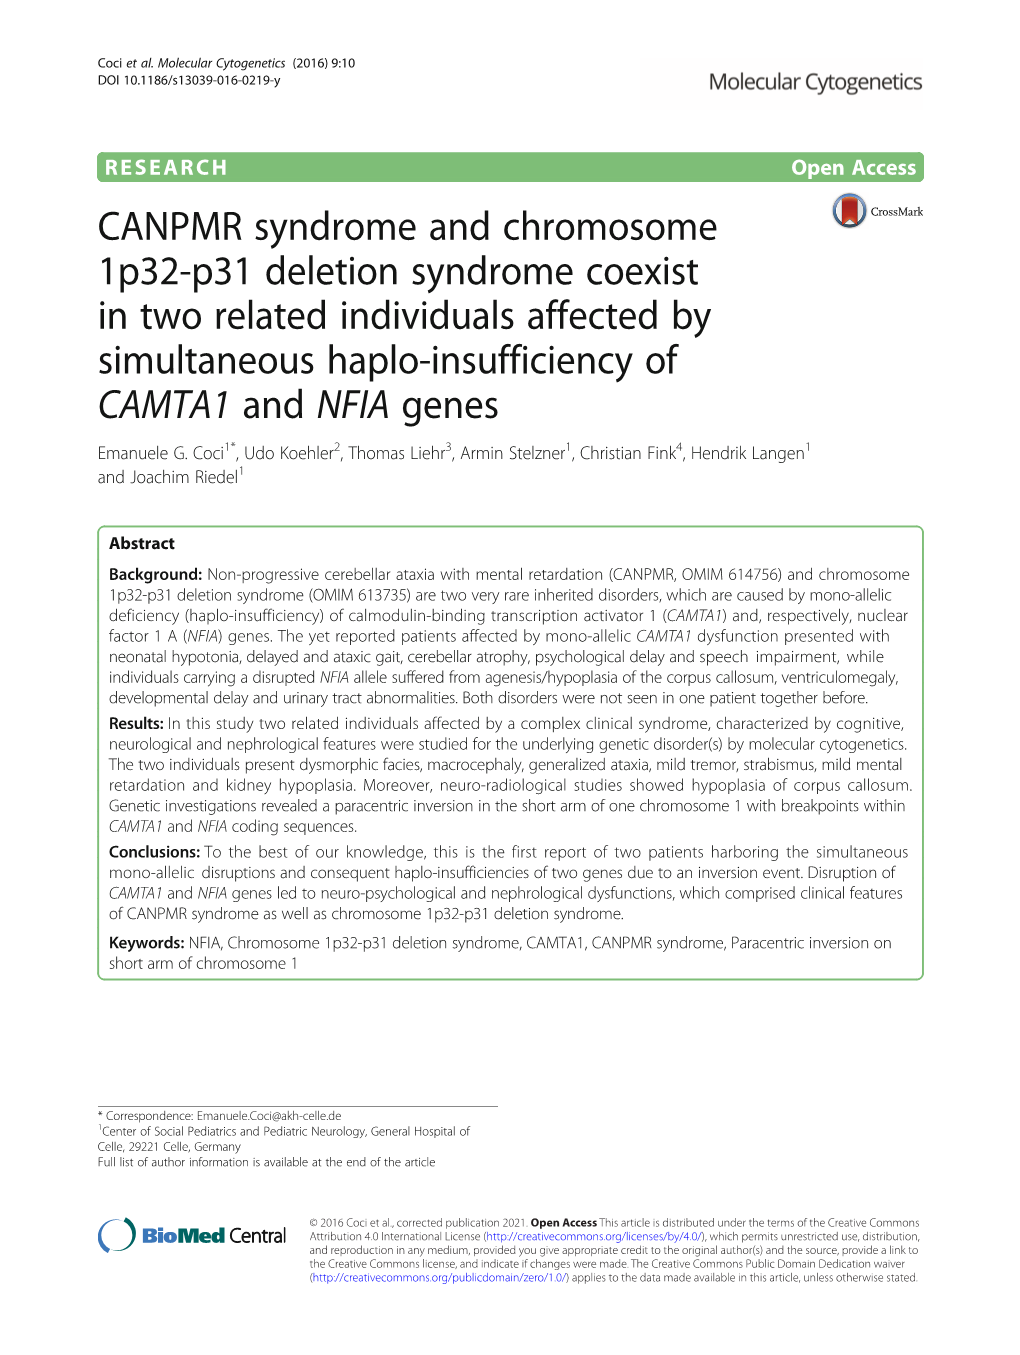 CANPMR Syndrome and Chromosome 1P32-P31 Deletion Syndrome